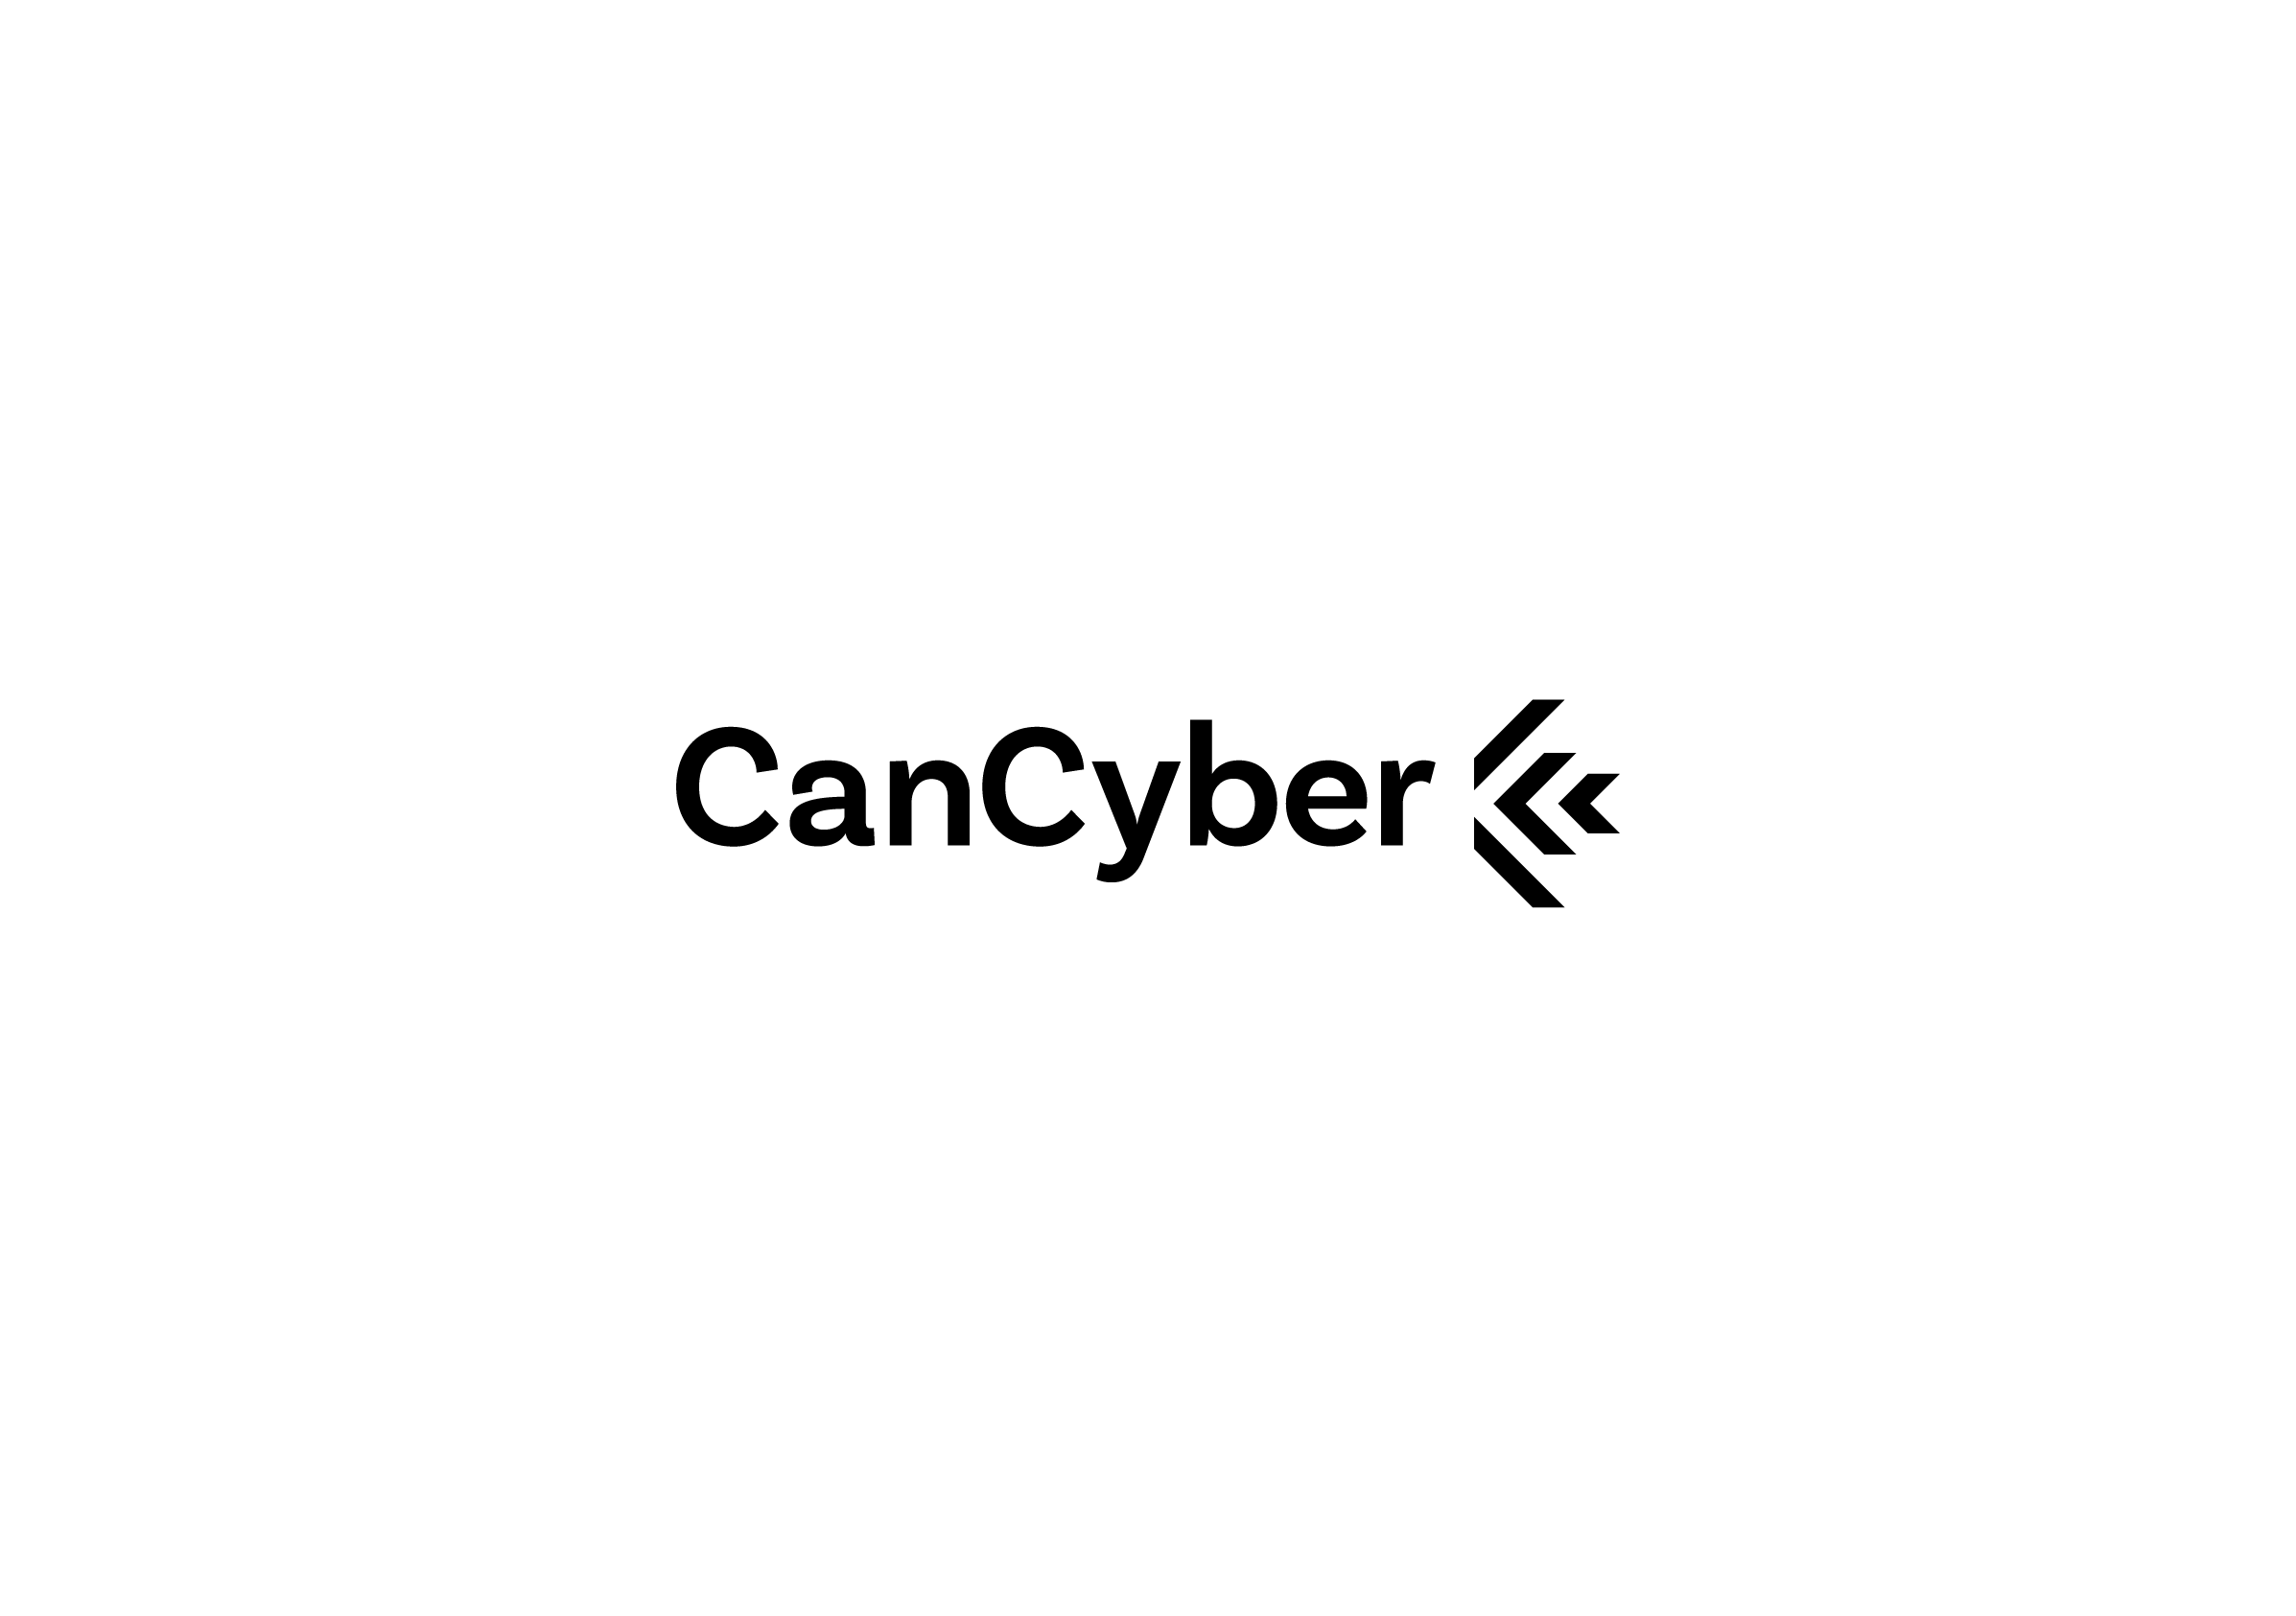 Logo Black for CanCyber, a cyber threat intelligence company by Graphic Design Studio idApostle